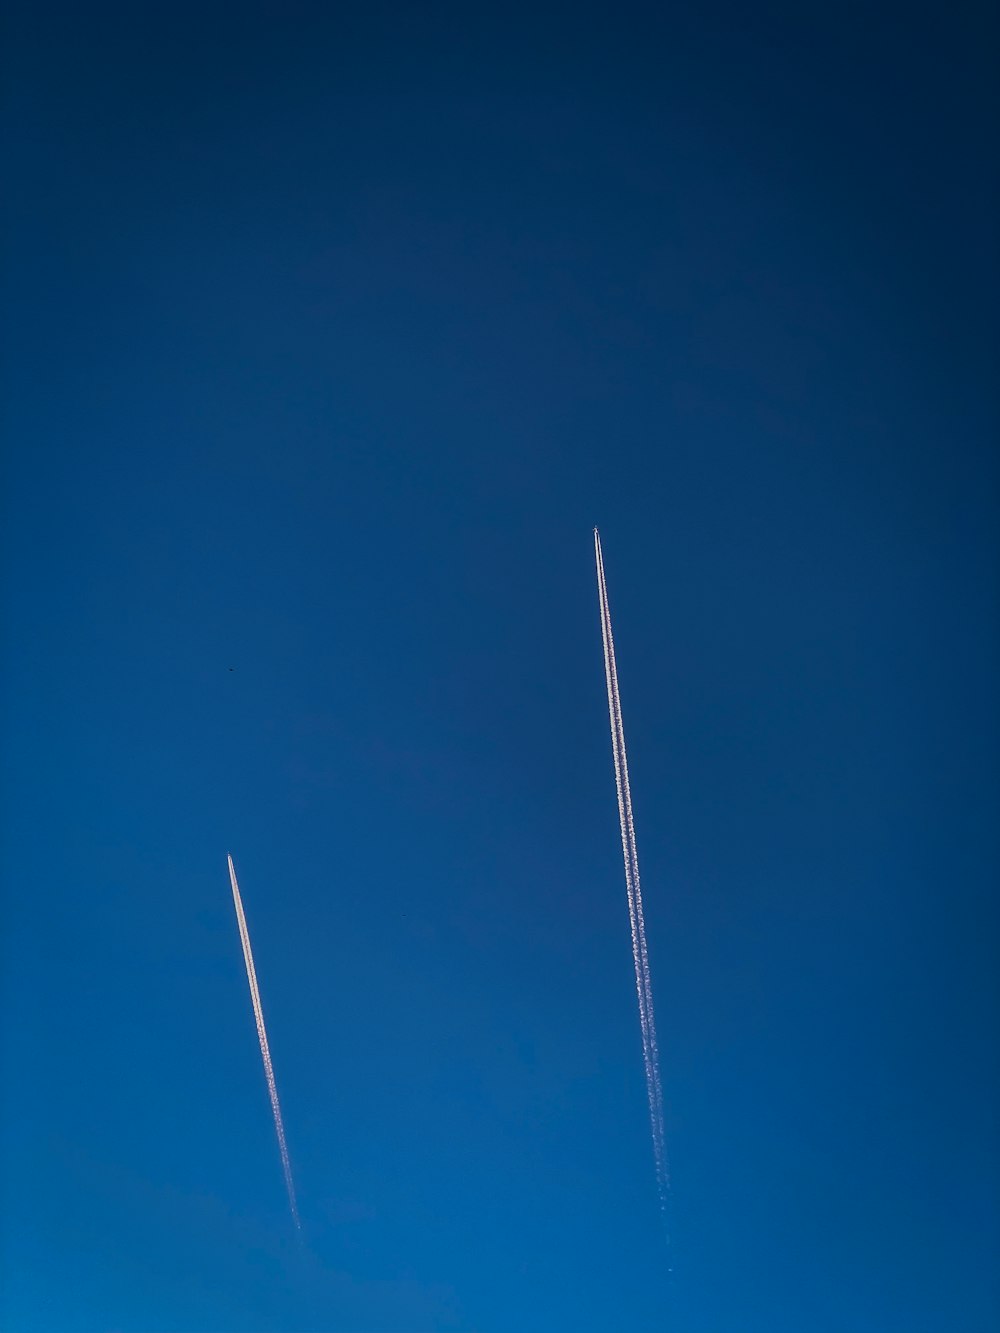 a couple of airplanes flying through a blue sky